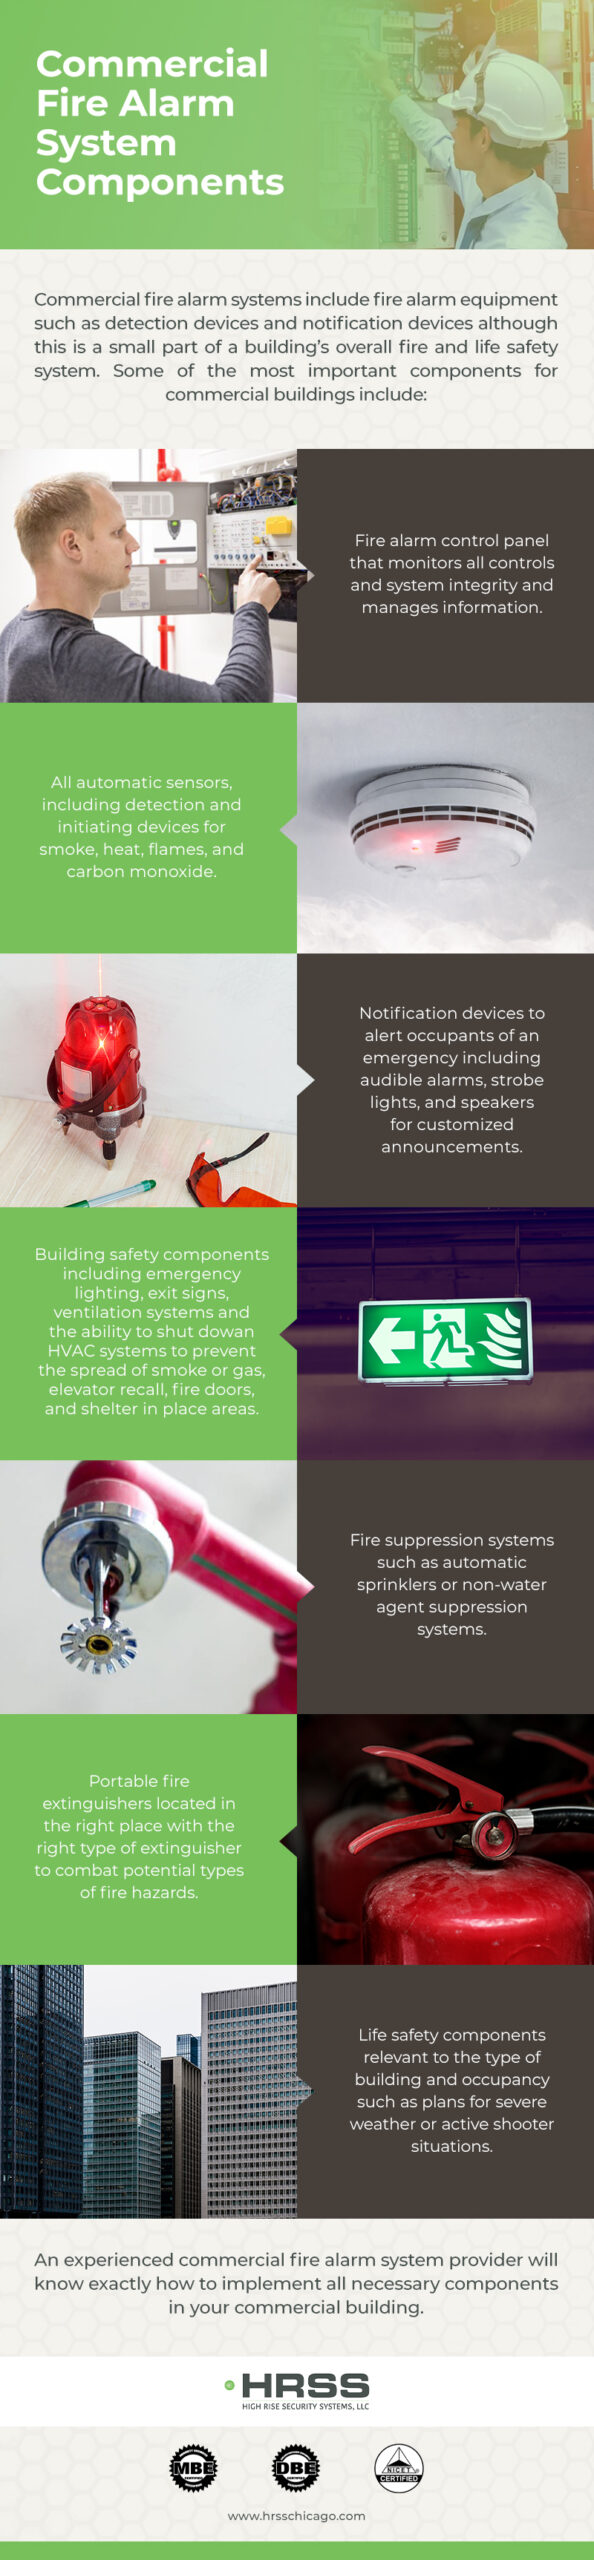 Commercial Fire Alarm System Components